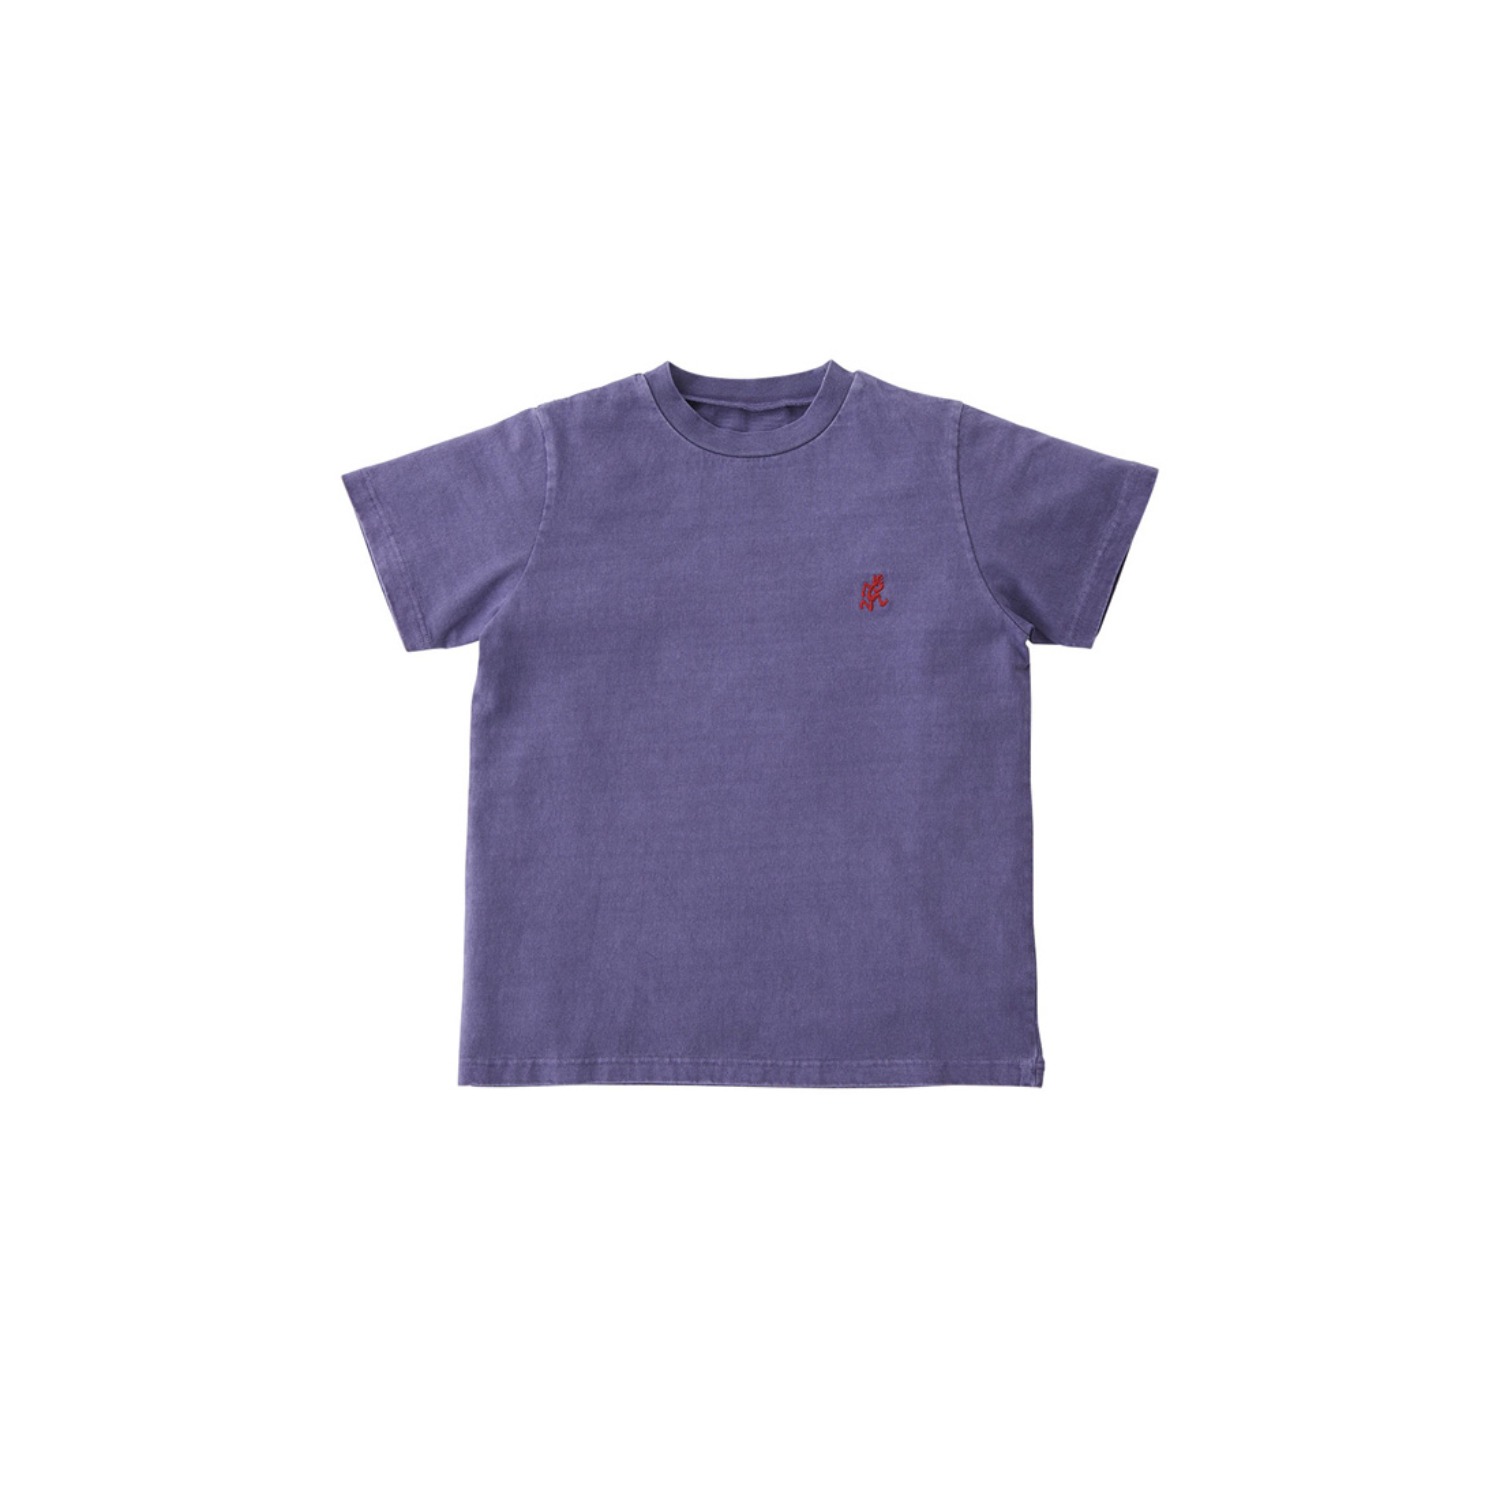 Kids One Point Tee - 3size